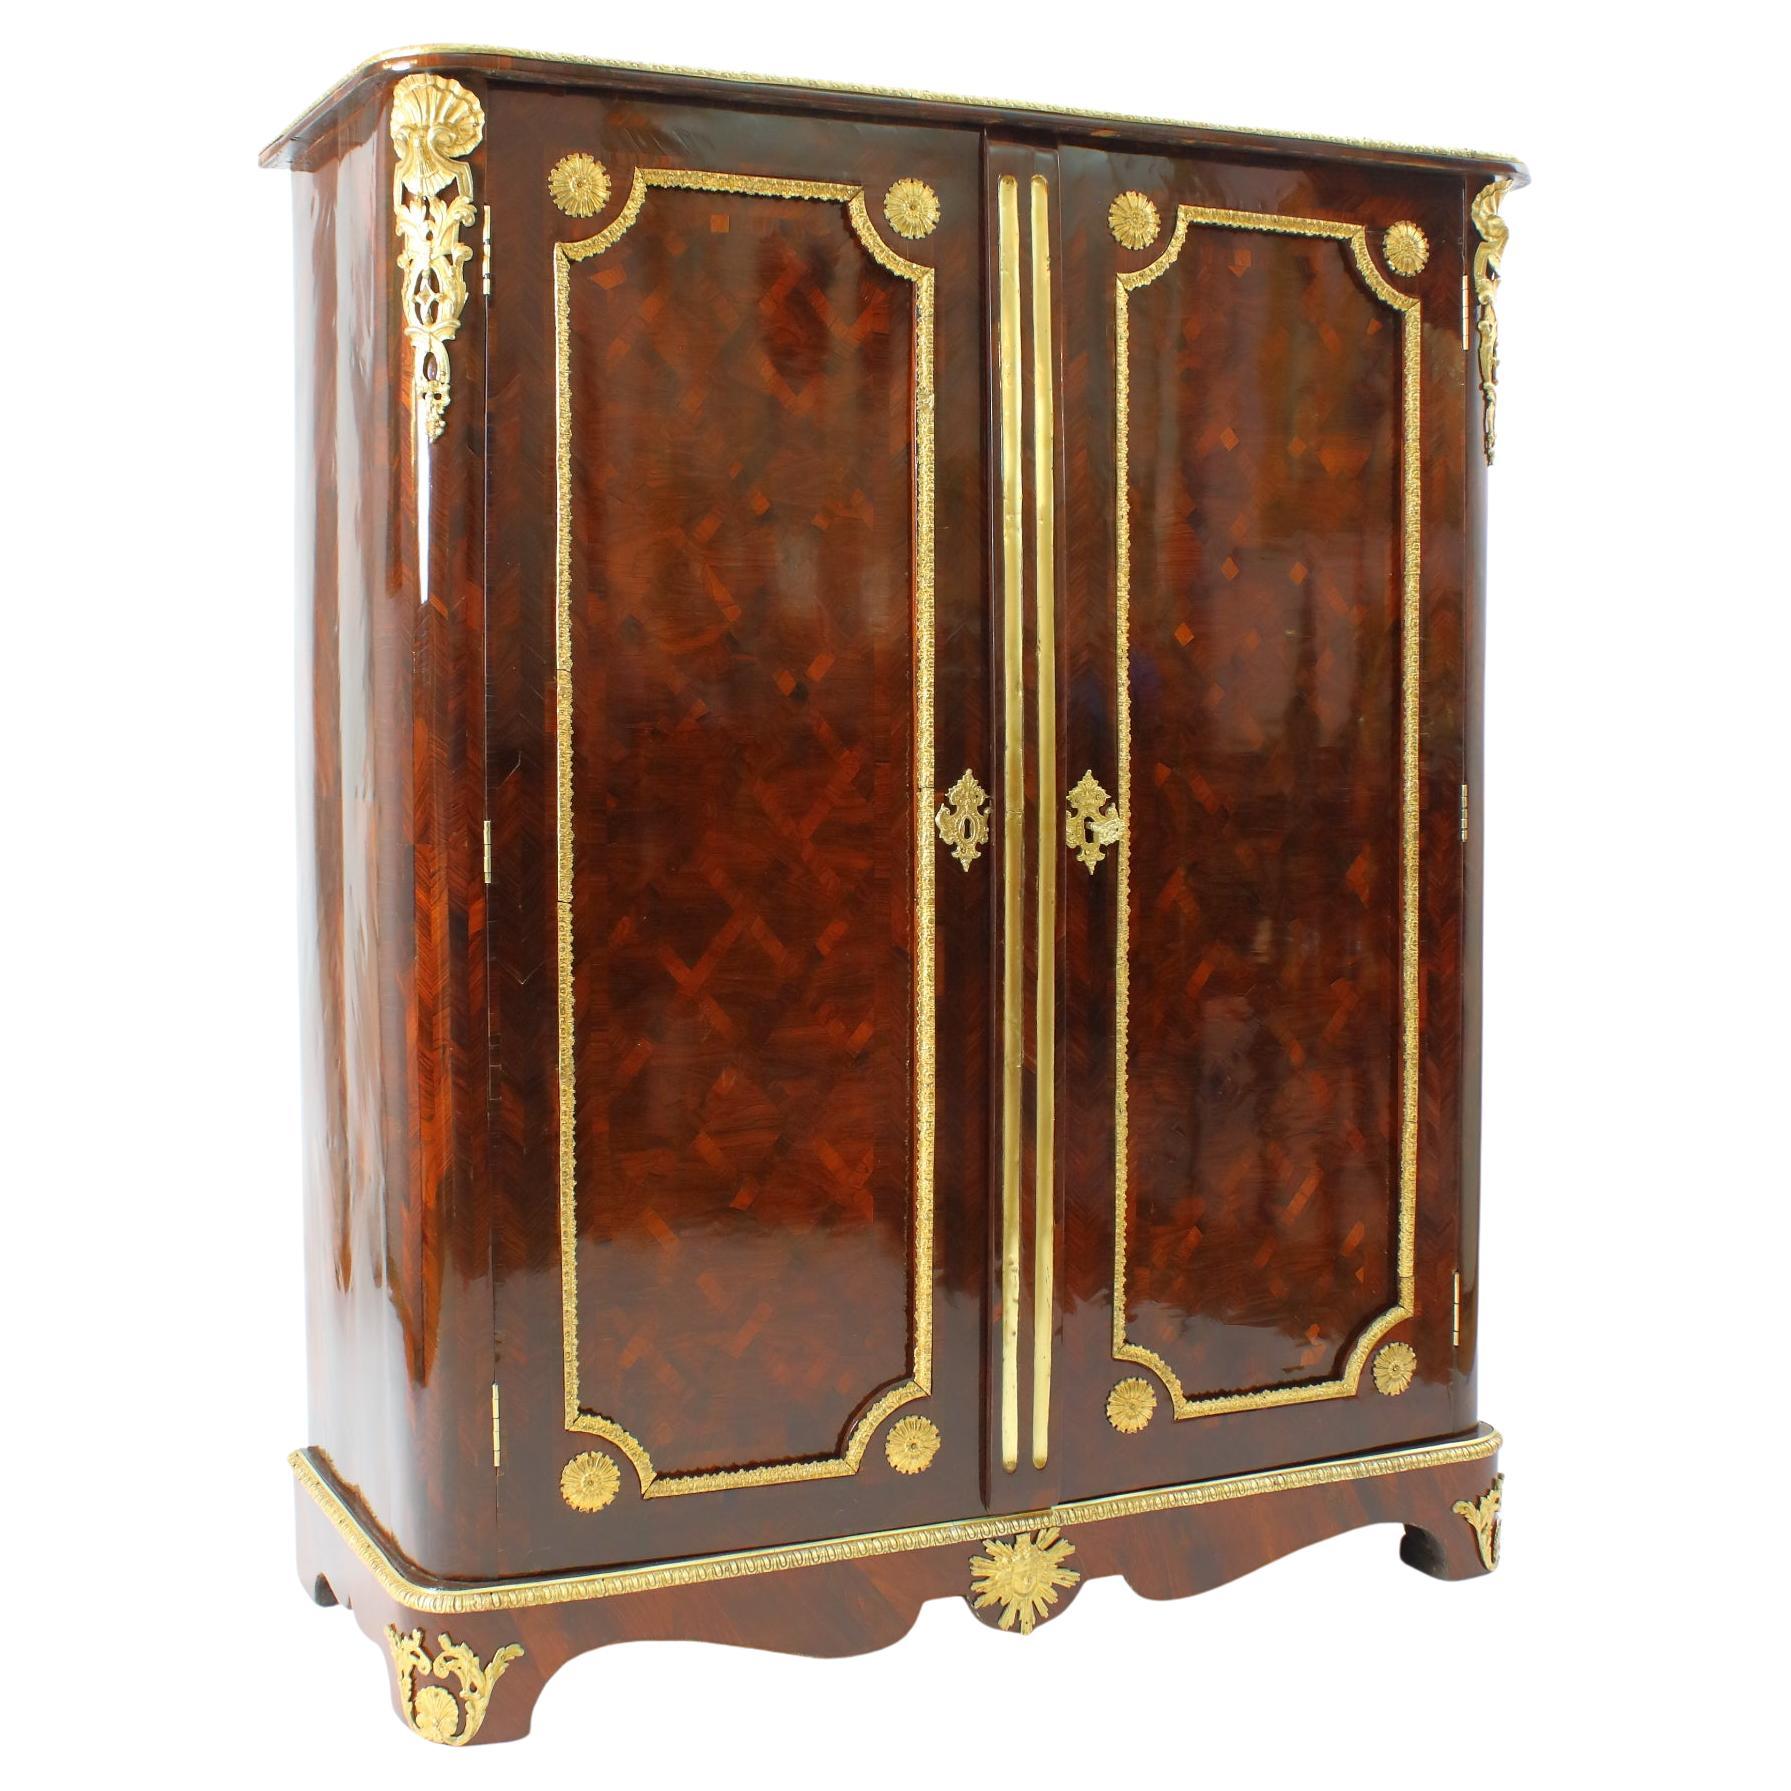 Early 18th Century French Louis XIV Régence Trellis Marquetry Armoire Wardrobe For Sale